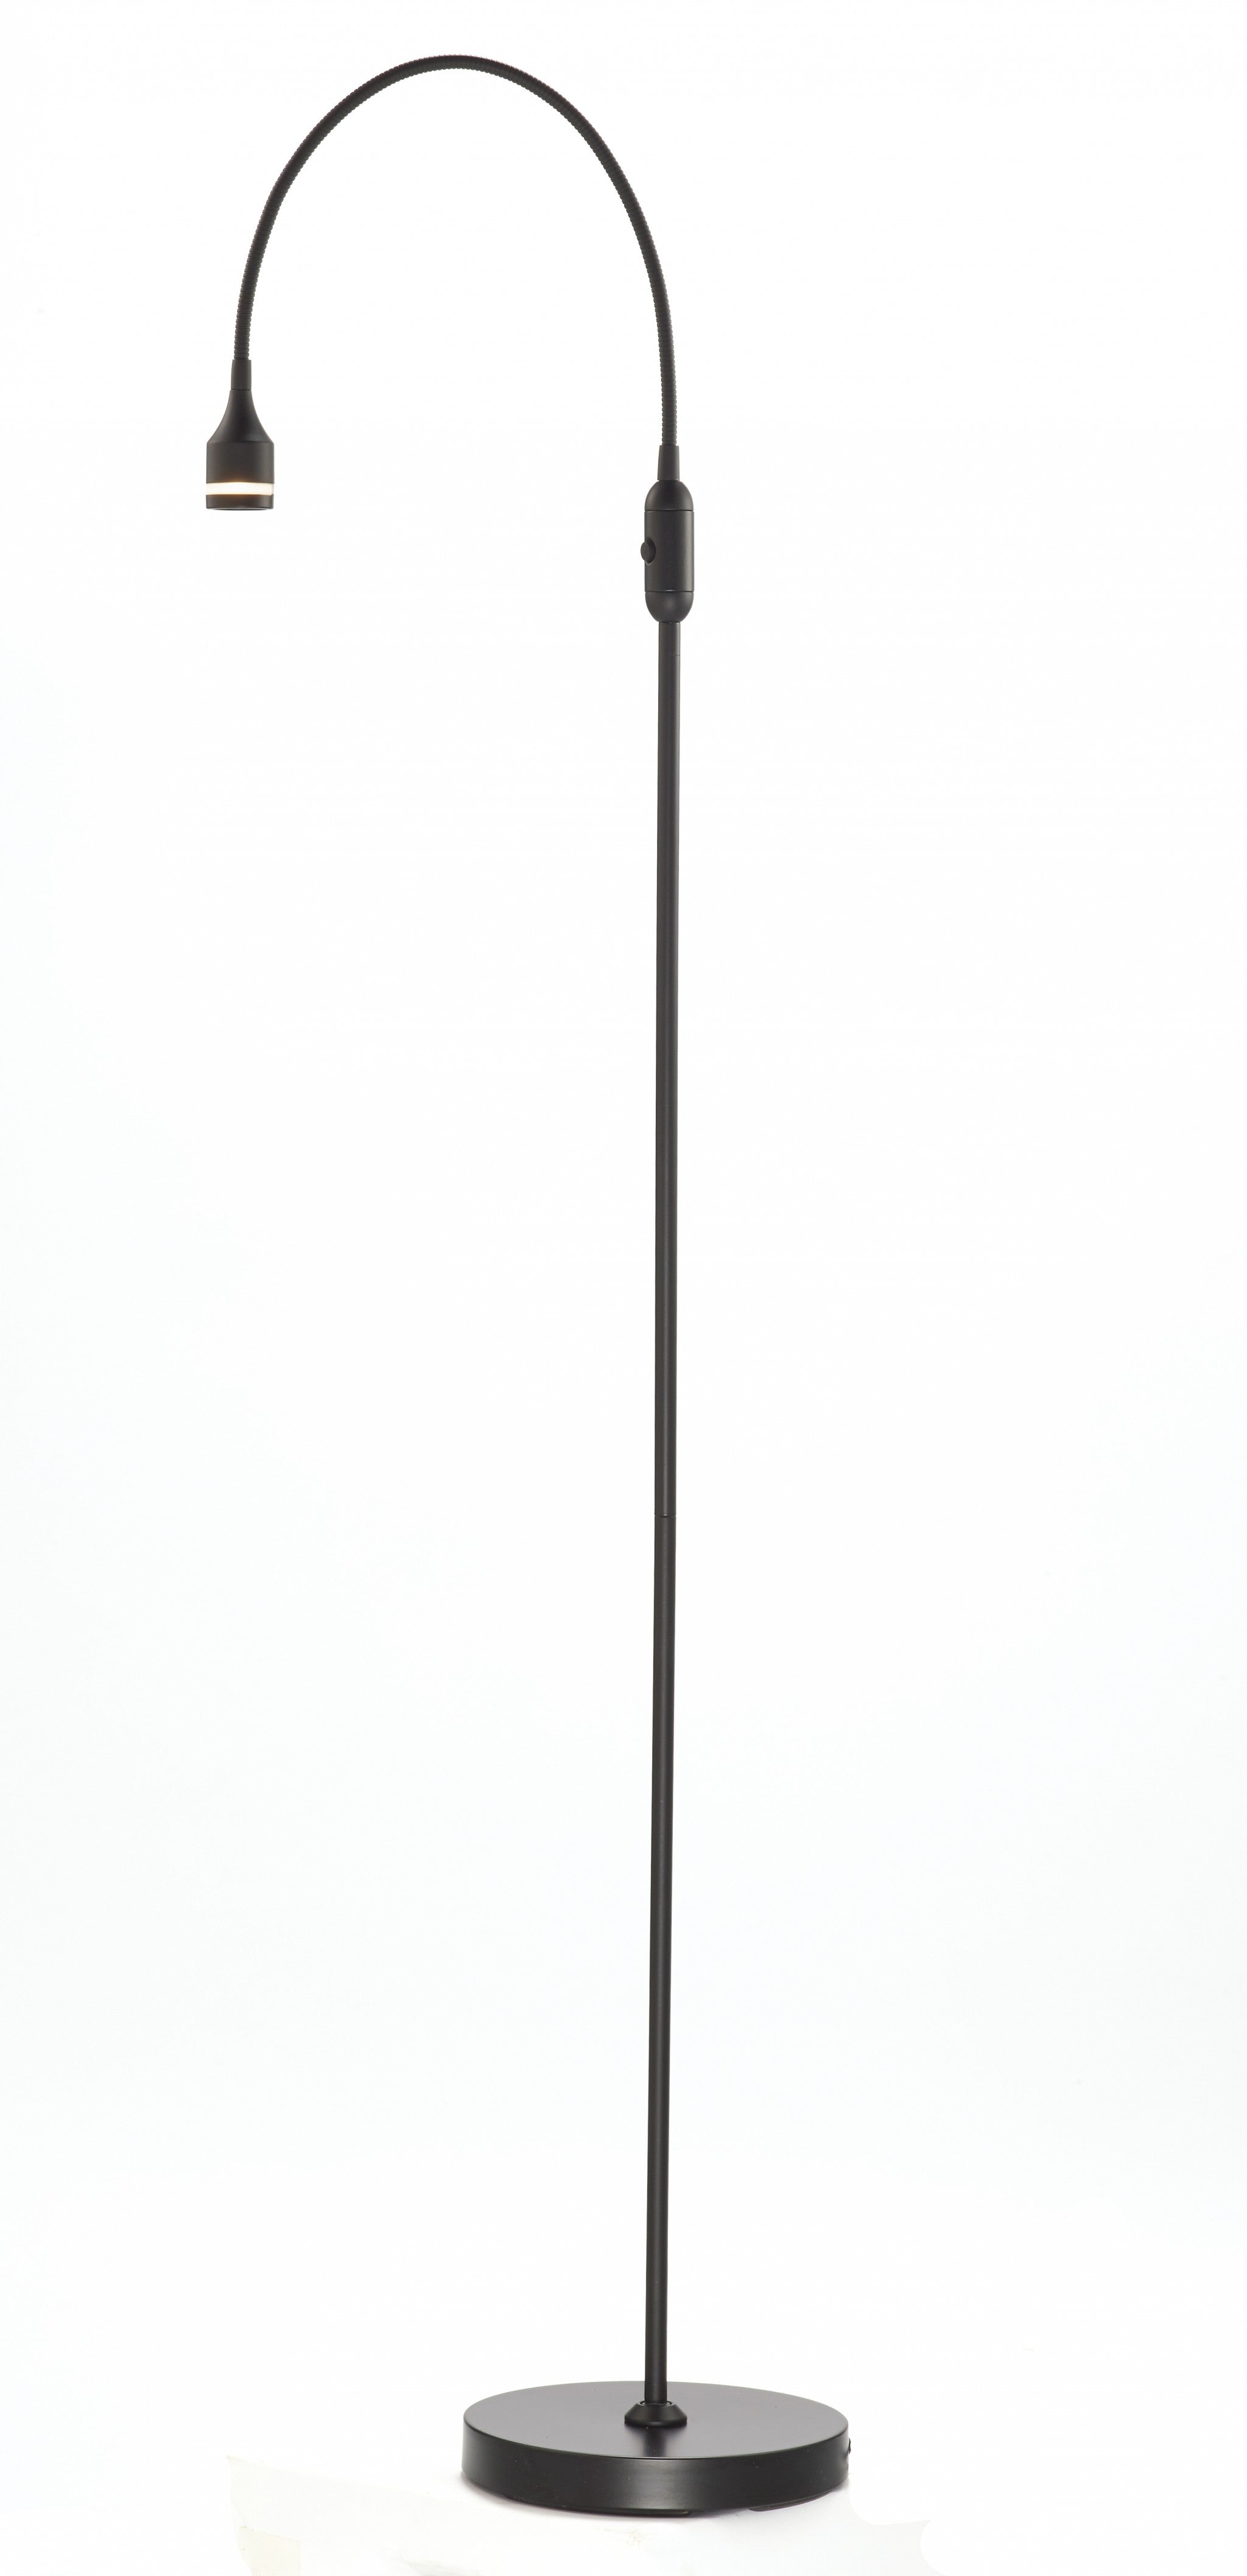 56" Arched Floor Lamp